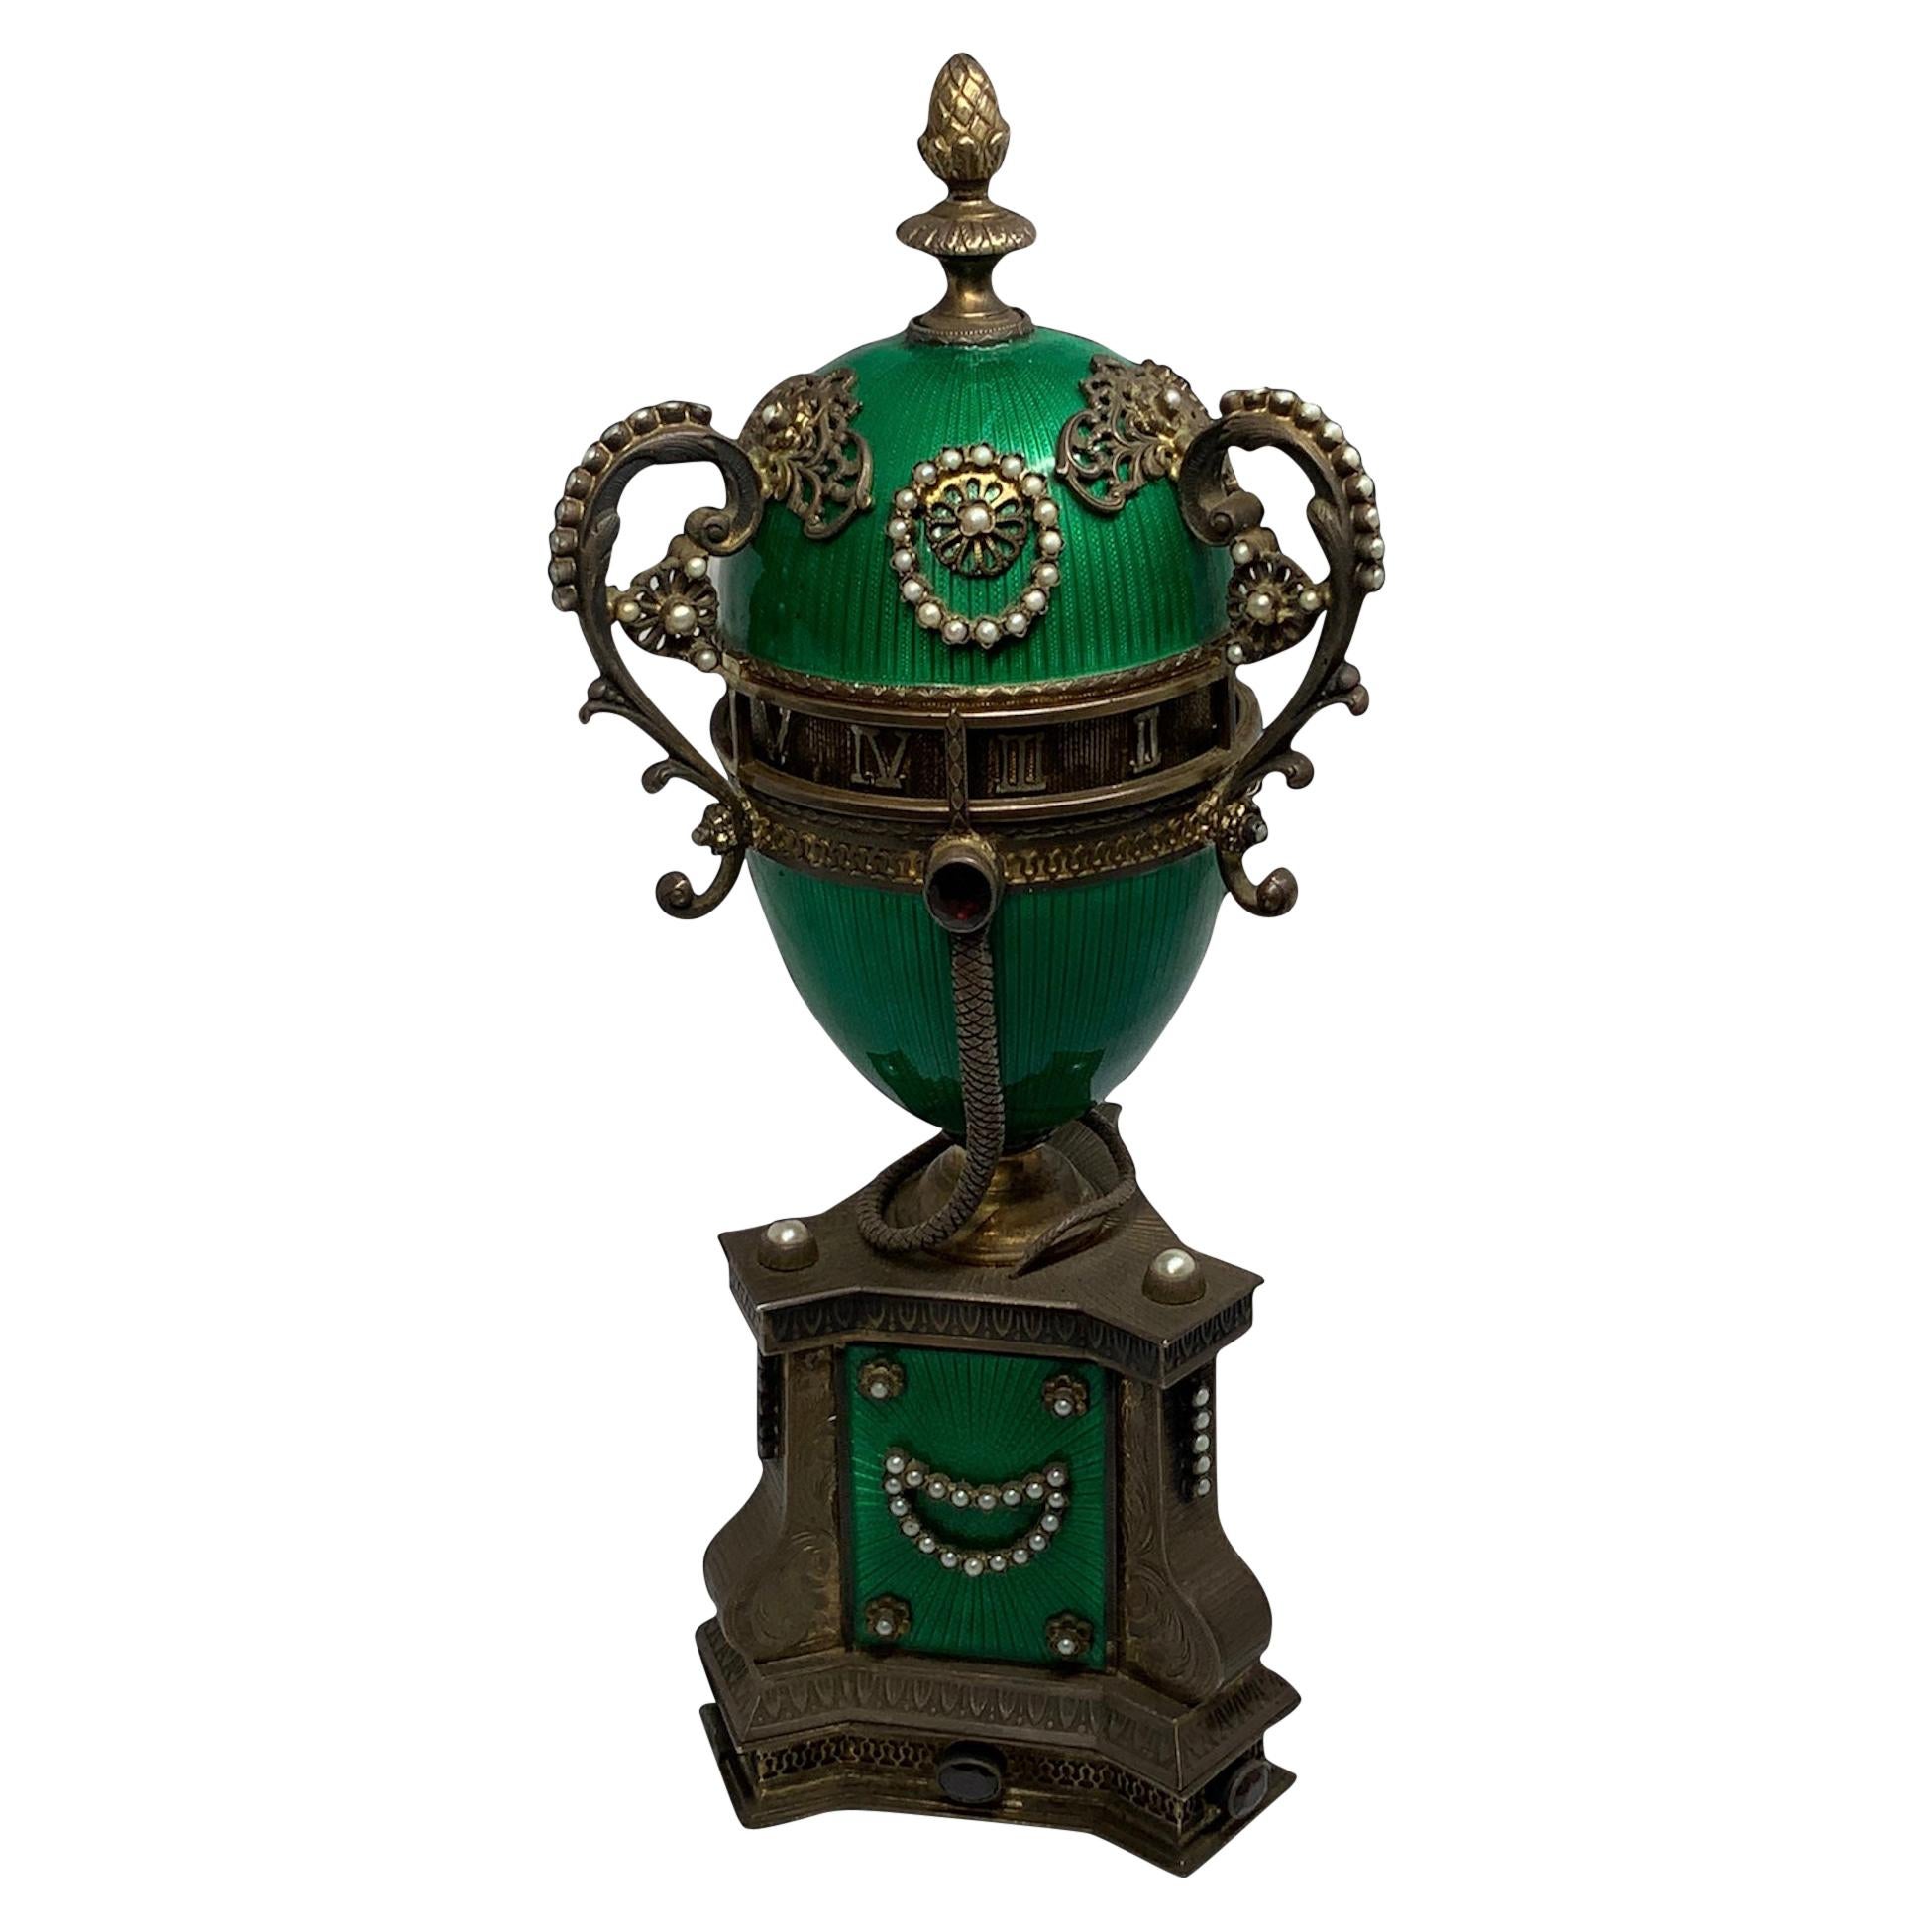 Faberge Style Guilloche Egg Gilt Silver Annular Serpent Clock